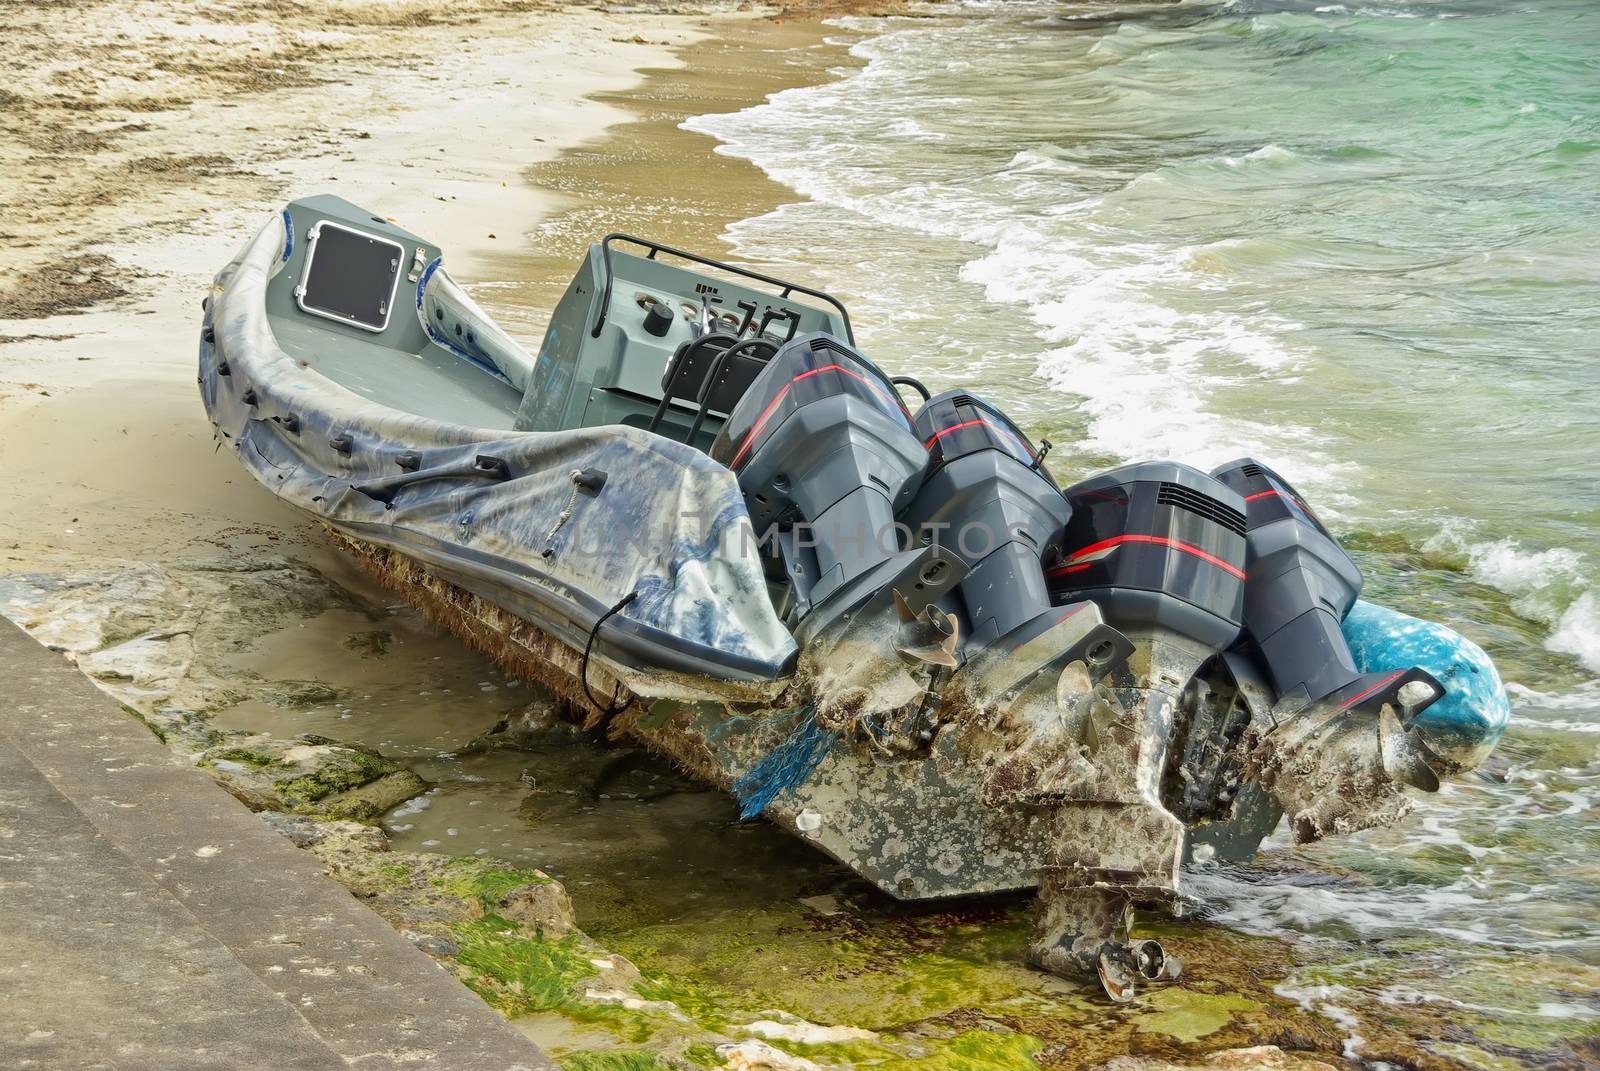 Wrecked Powerboat in the mediterranean sea used for illegal human transportation from Africa